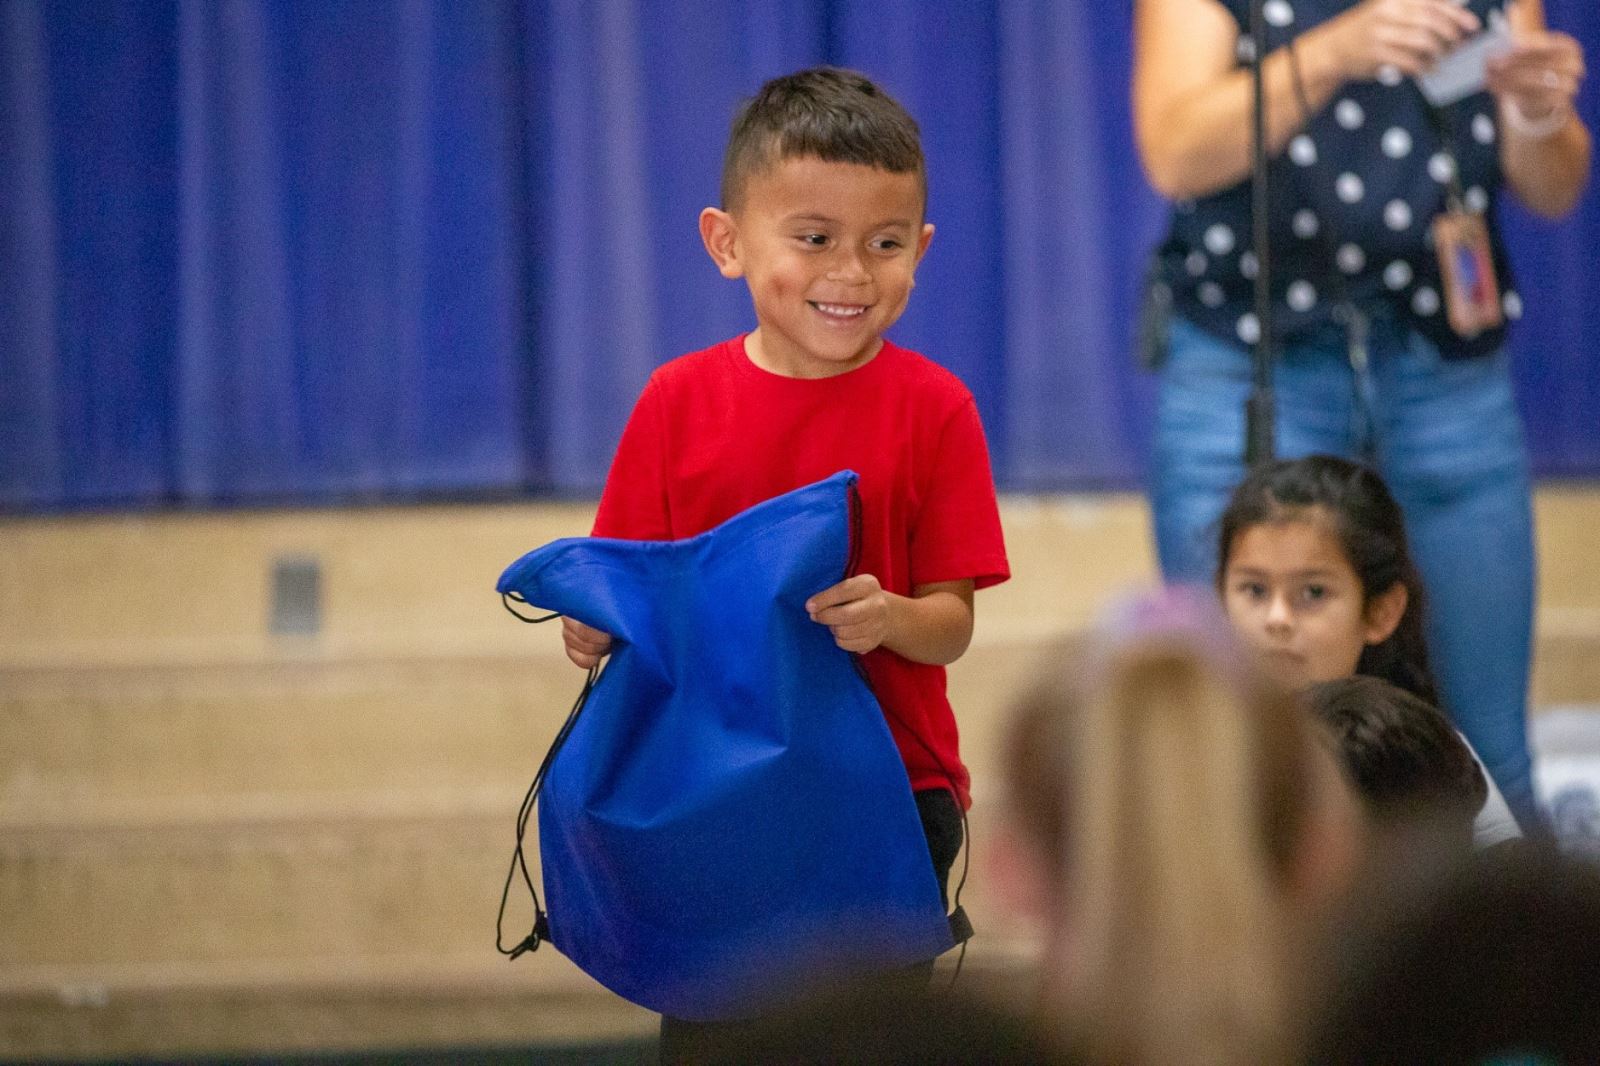 A boy smiles with his brand new backpack he just won!